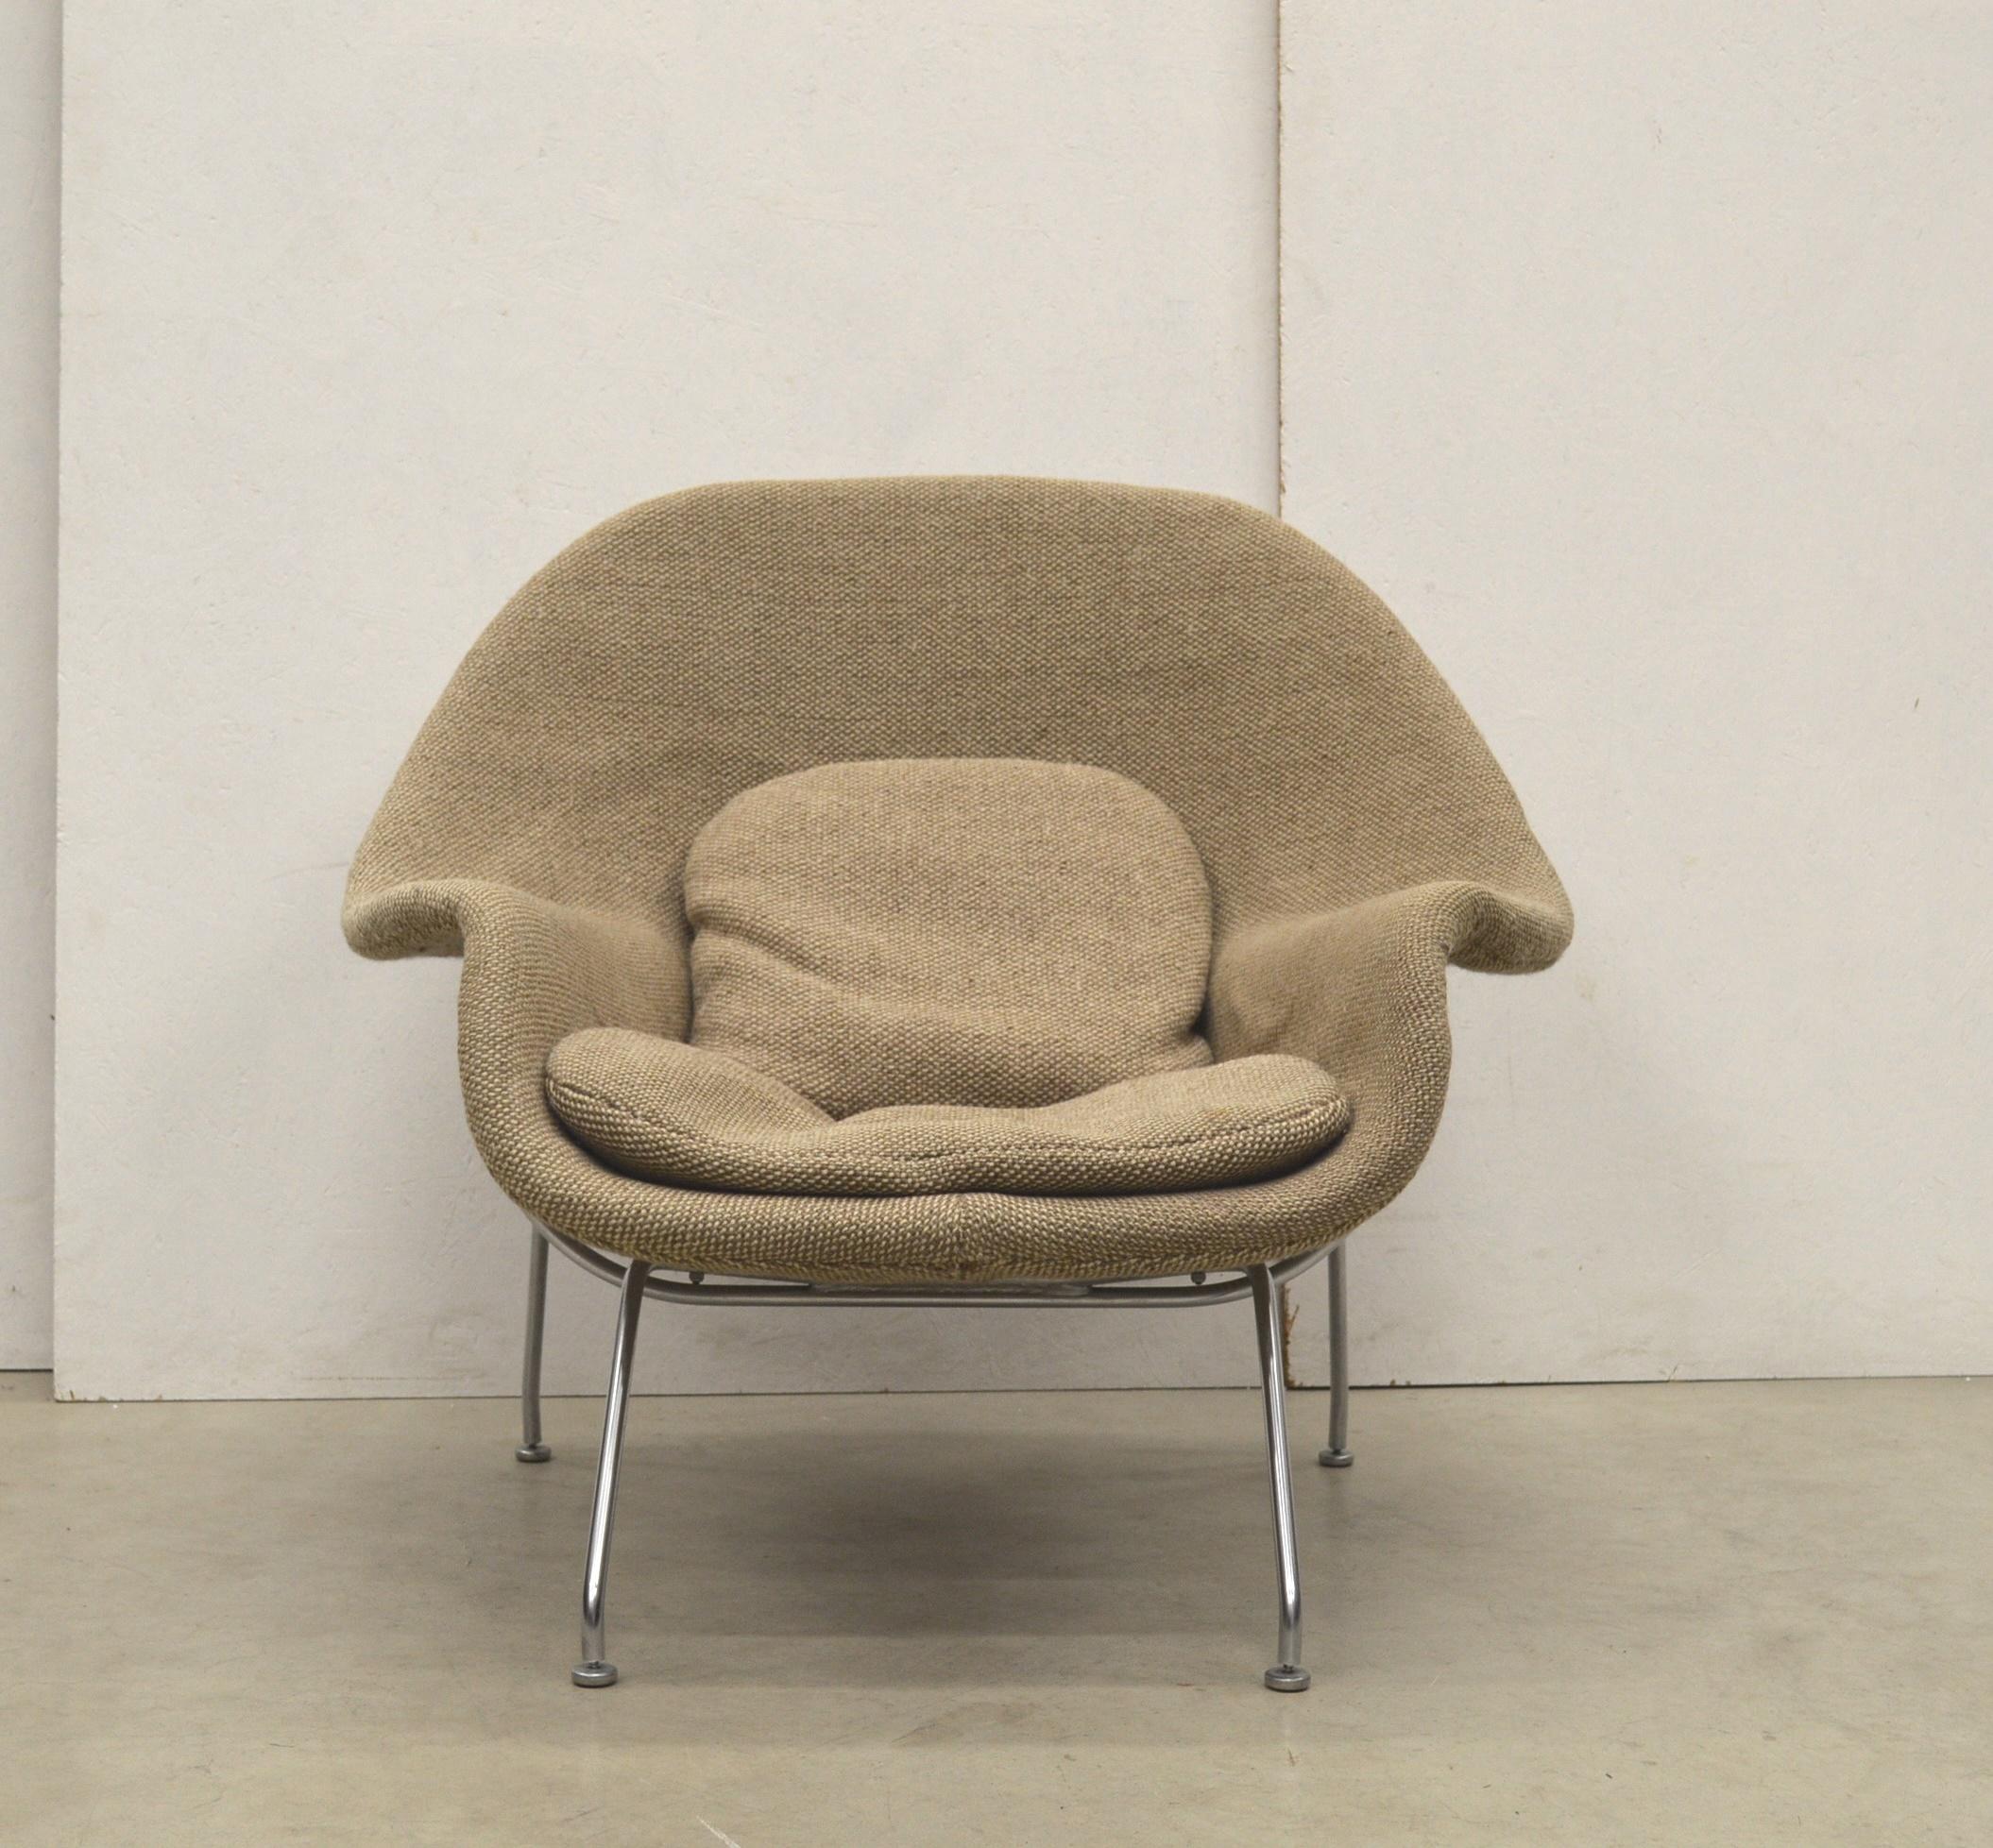 Early 2-tone wool Womb chair by Eero Saarinen for Knoll. 

The groundbreaking Womb chair was designed in 1948 by Eero Saarinen at Florence Knoll's request for 